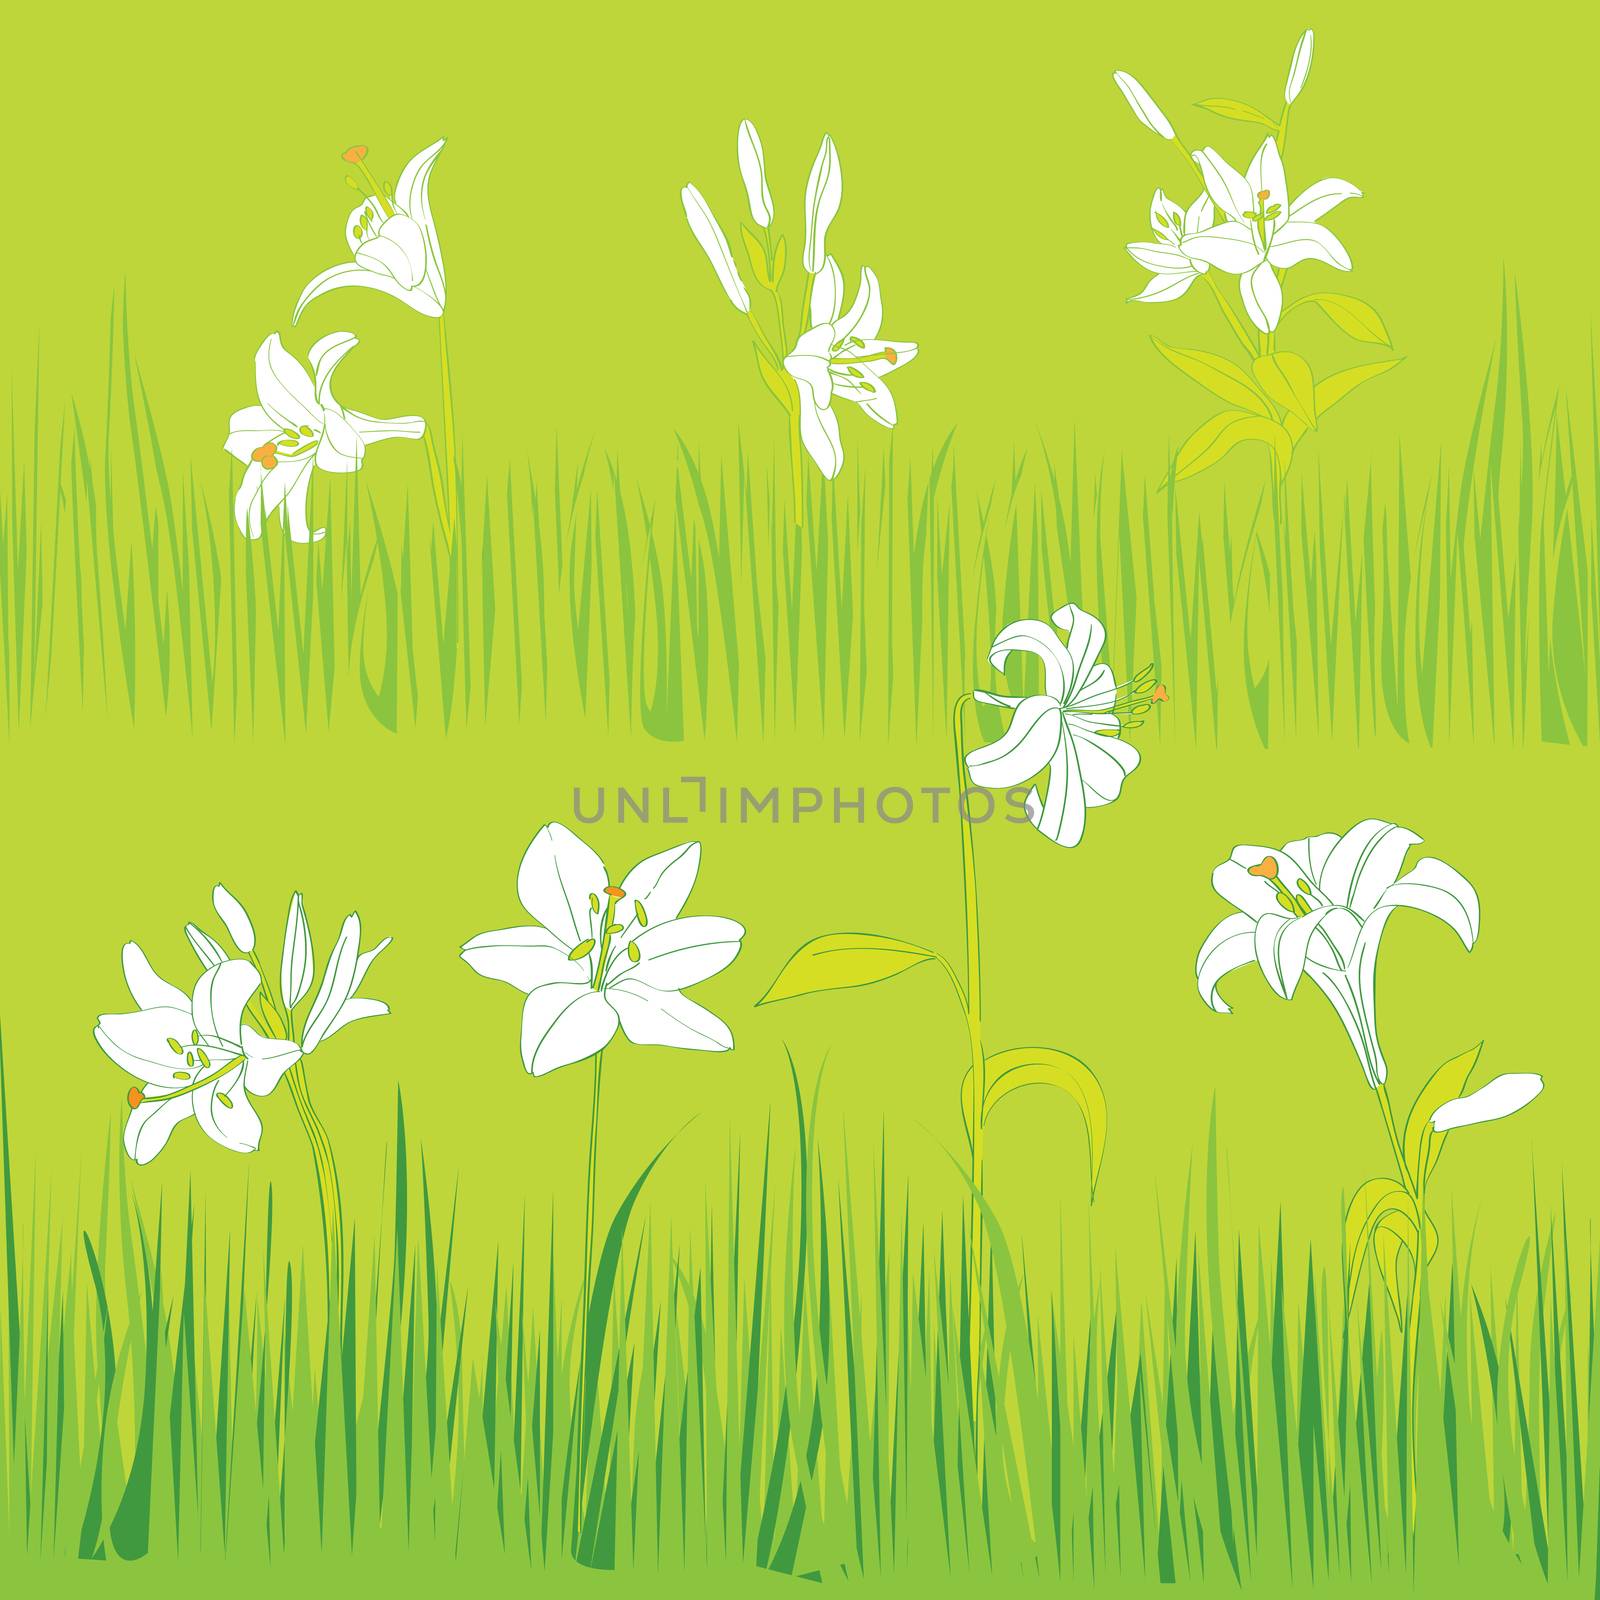 Lilies garden card, hand drawn illustration of white flowers and grass on a green tile background